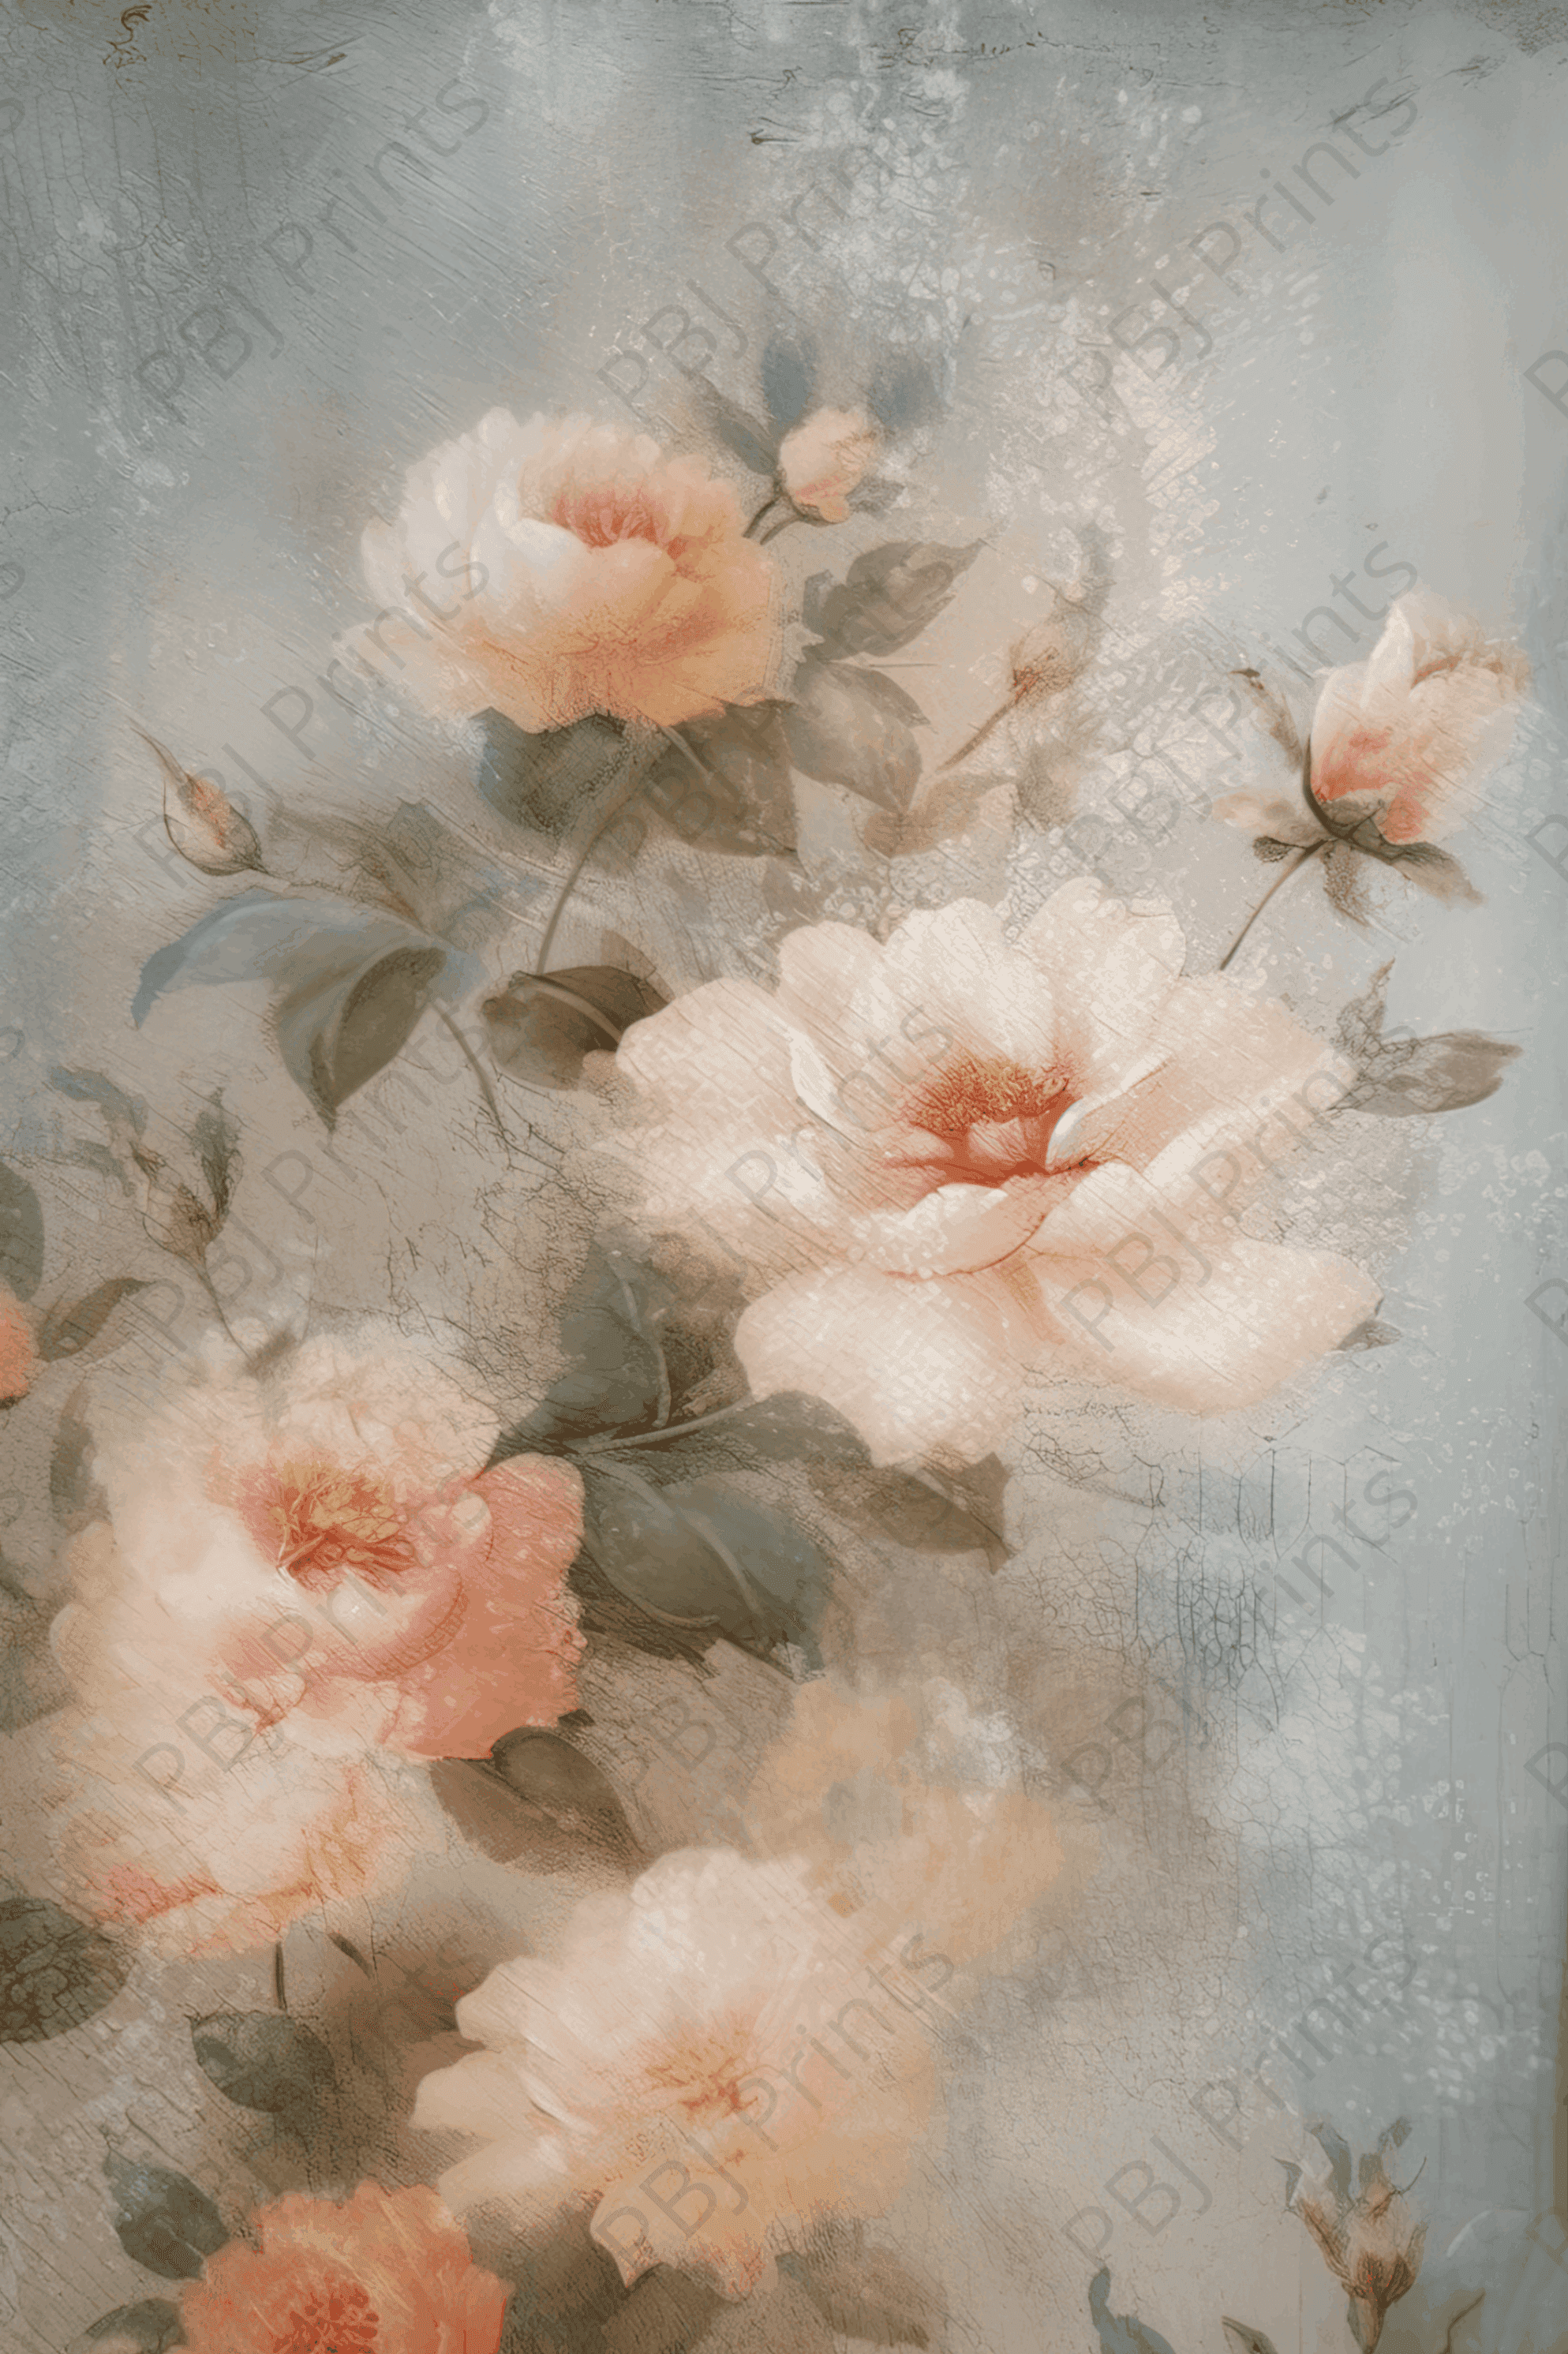 Weathered Roses - Artist by Whimsykel Designs - Art Prints, Decoupage Rice Paper, Flat Canvas Prints, Giclee Prints, Photo Prints, Poster Prints